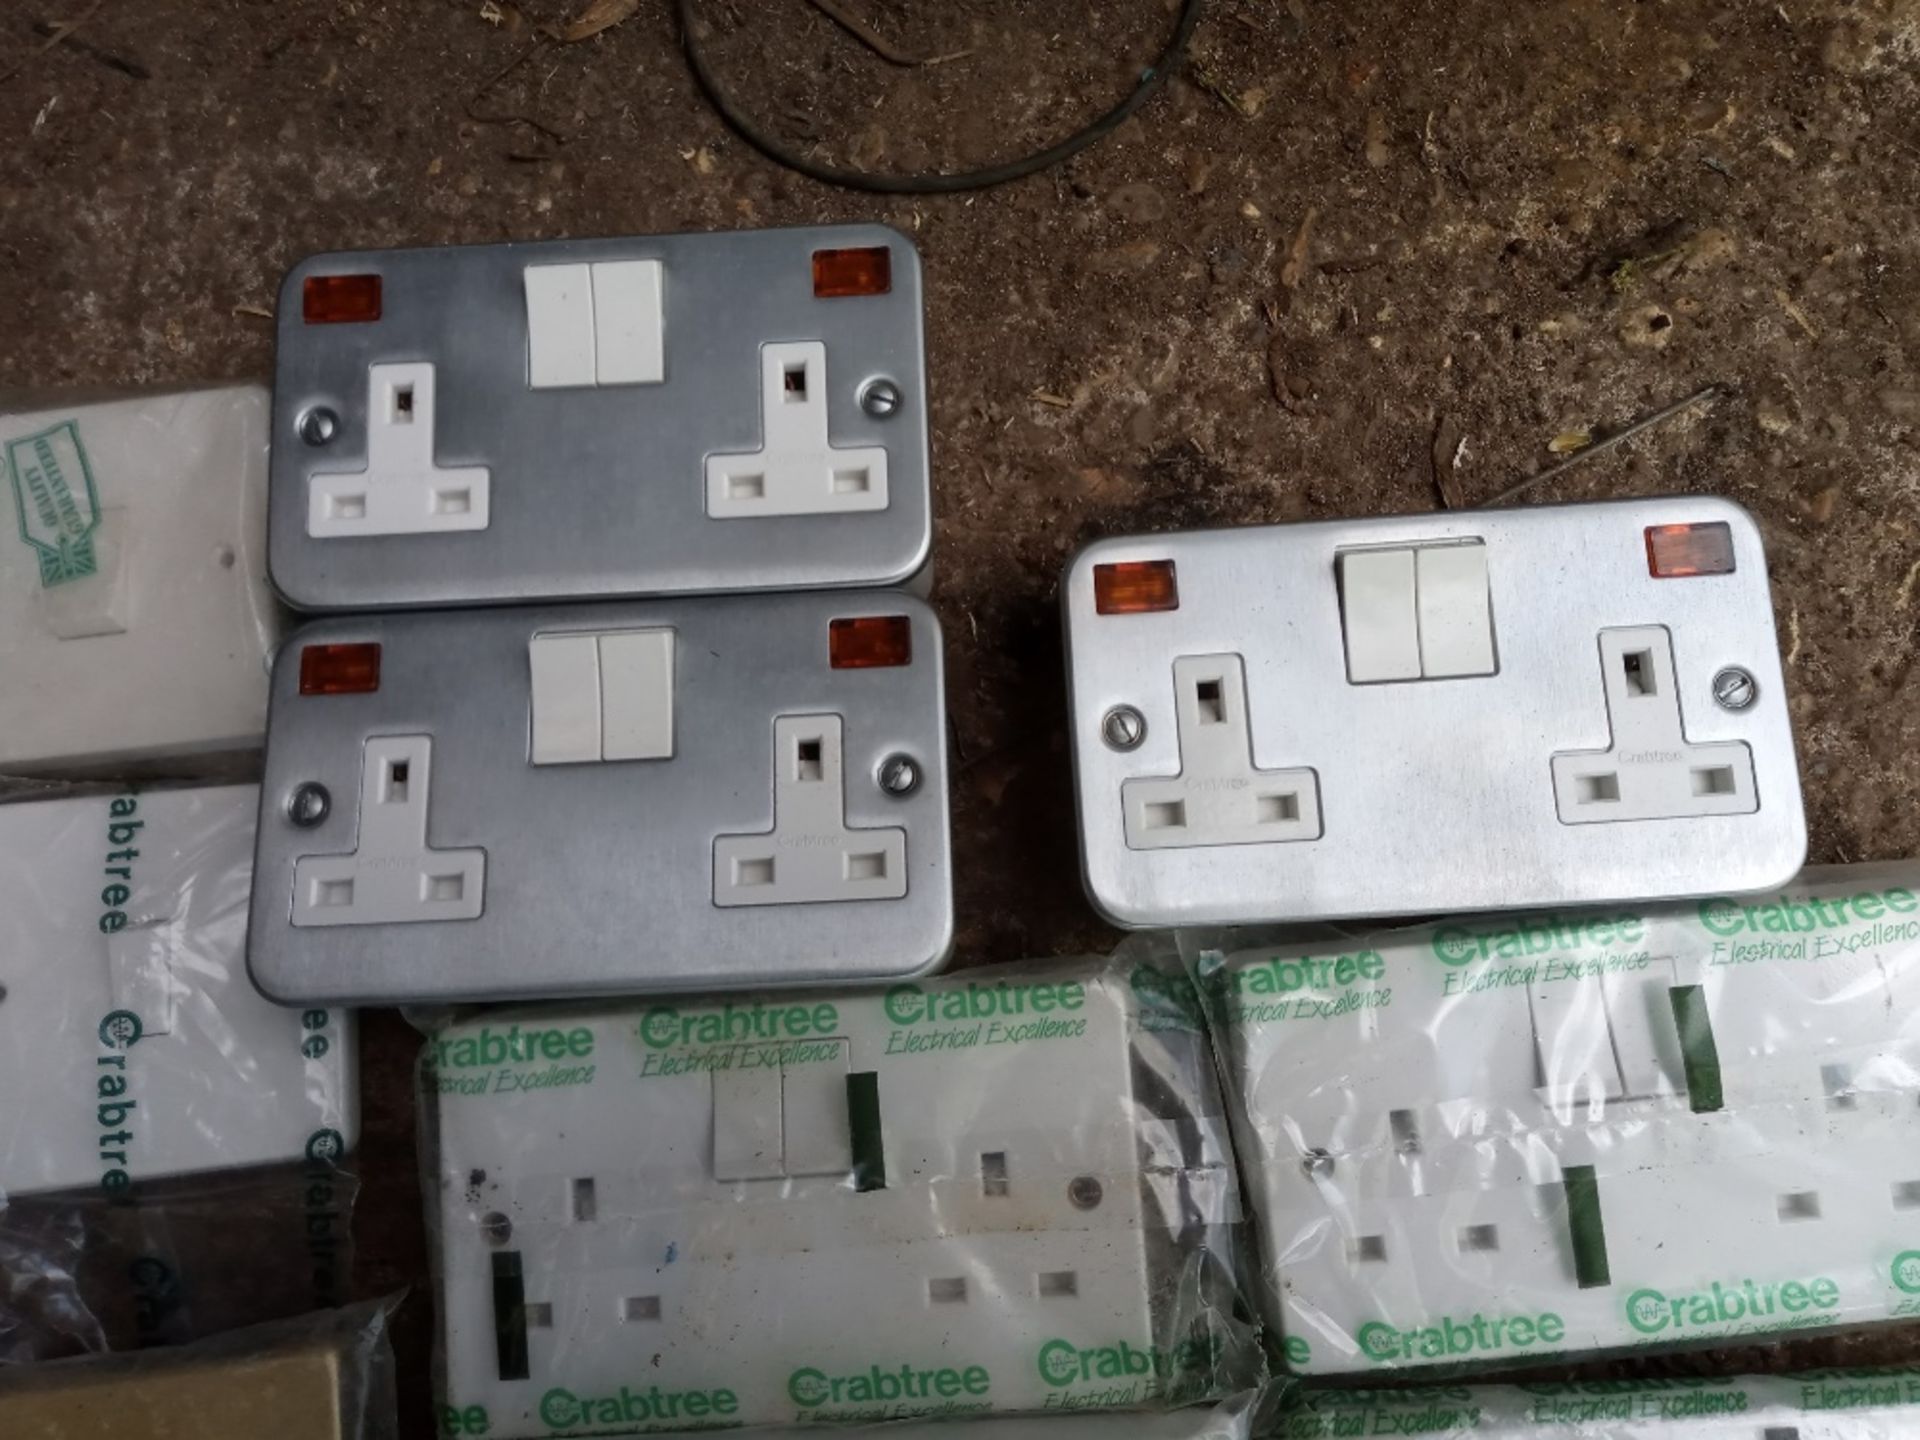 Brand new unused sealed Crabtree domestic electrical fittings and RCDs. - Image 3 of 5